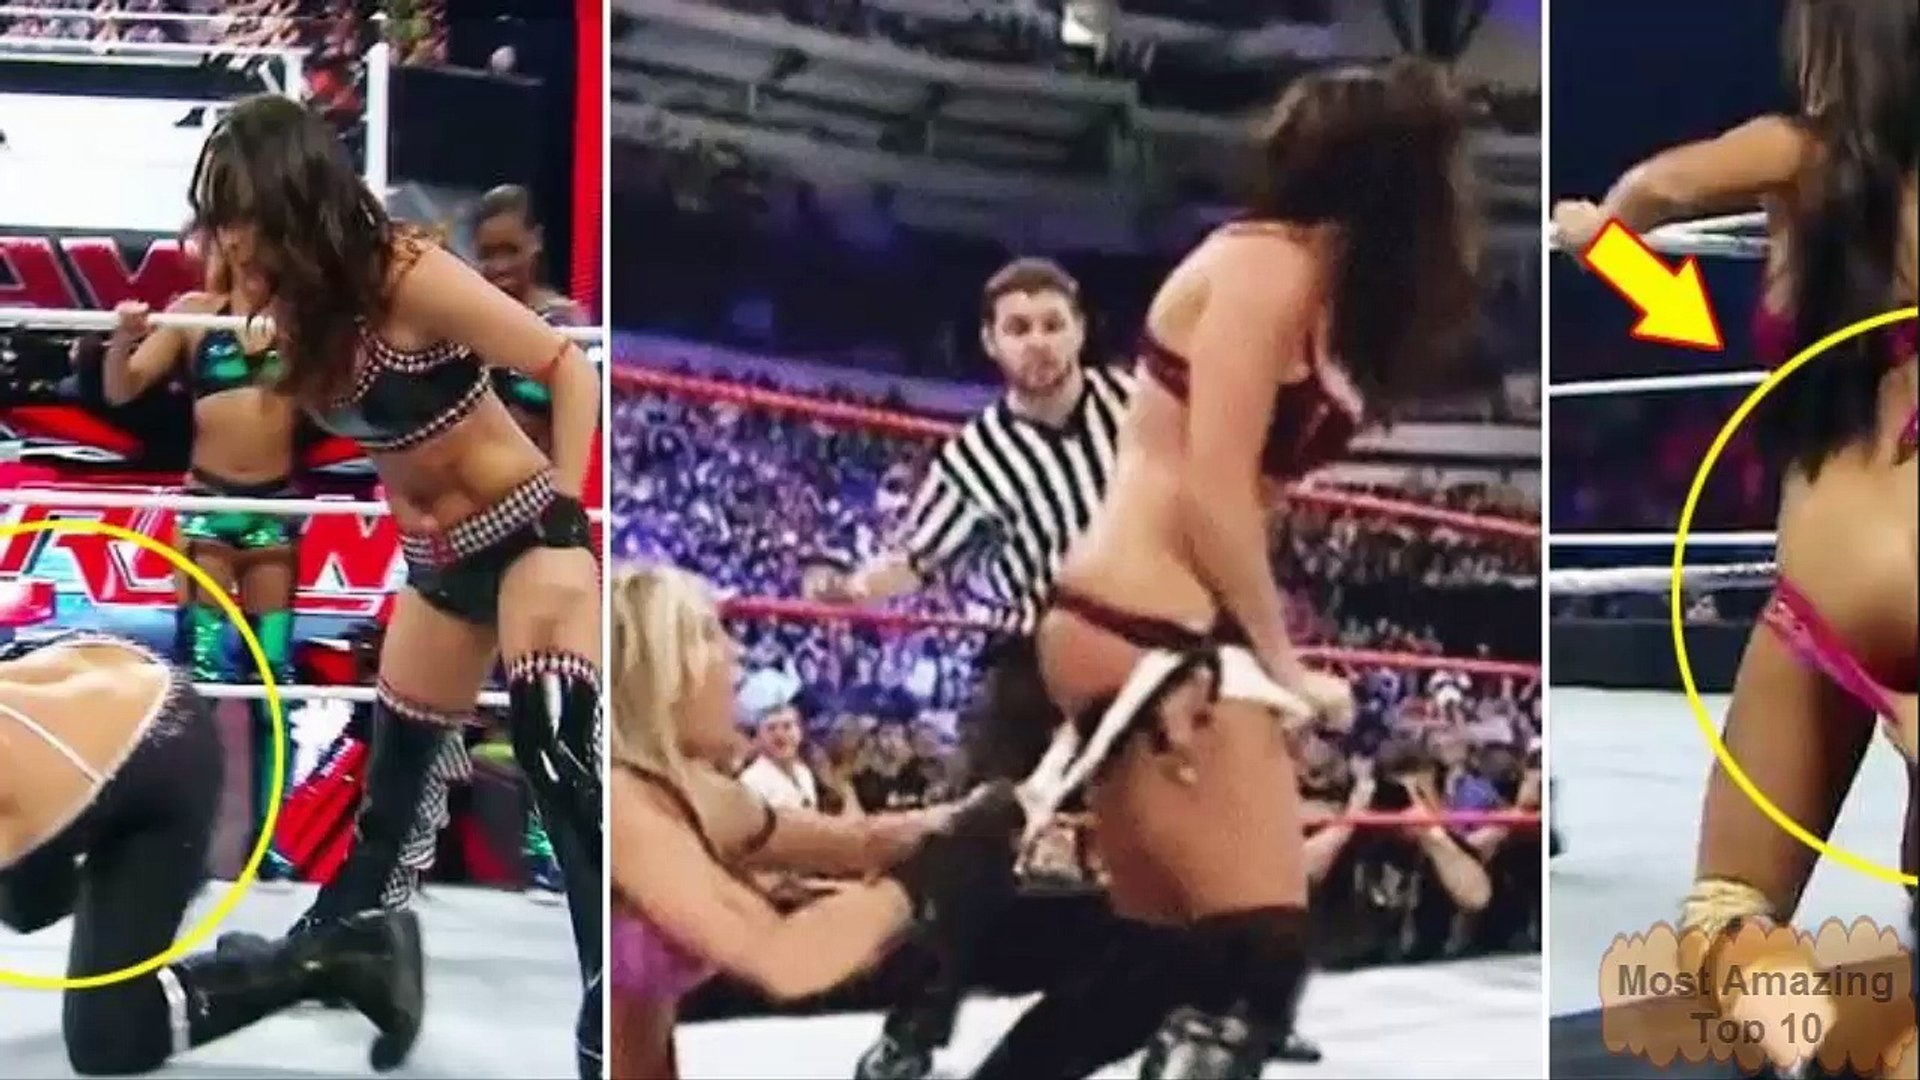 Top 10 Most Shocking Moments Of Nudity In Wwe Video.